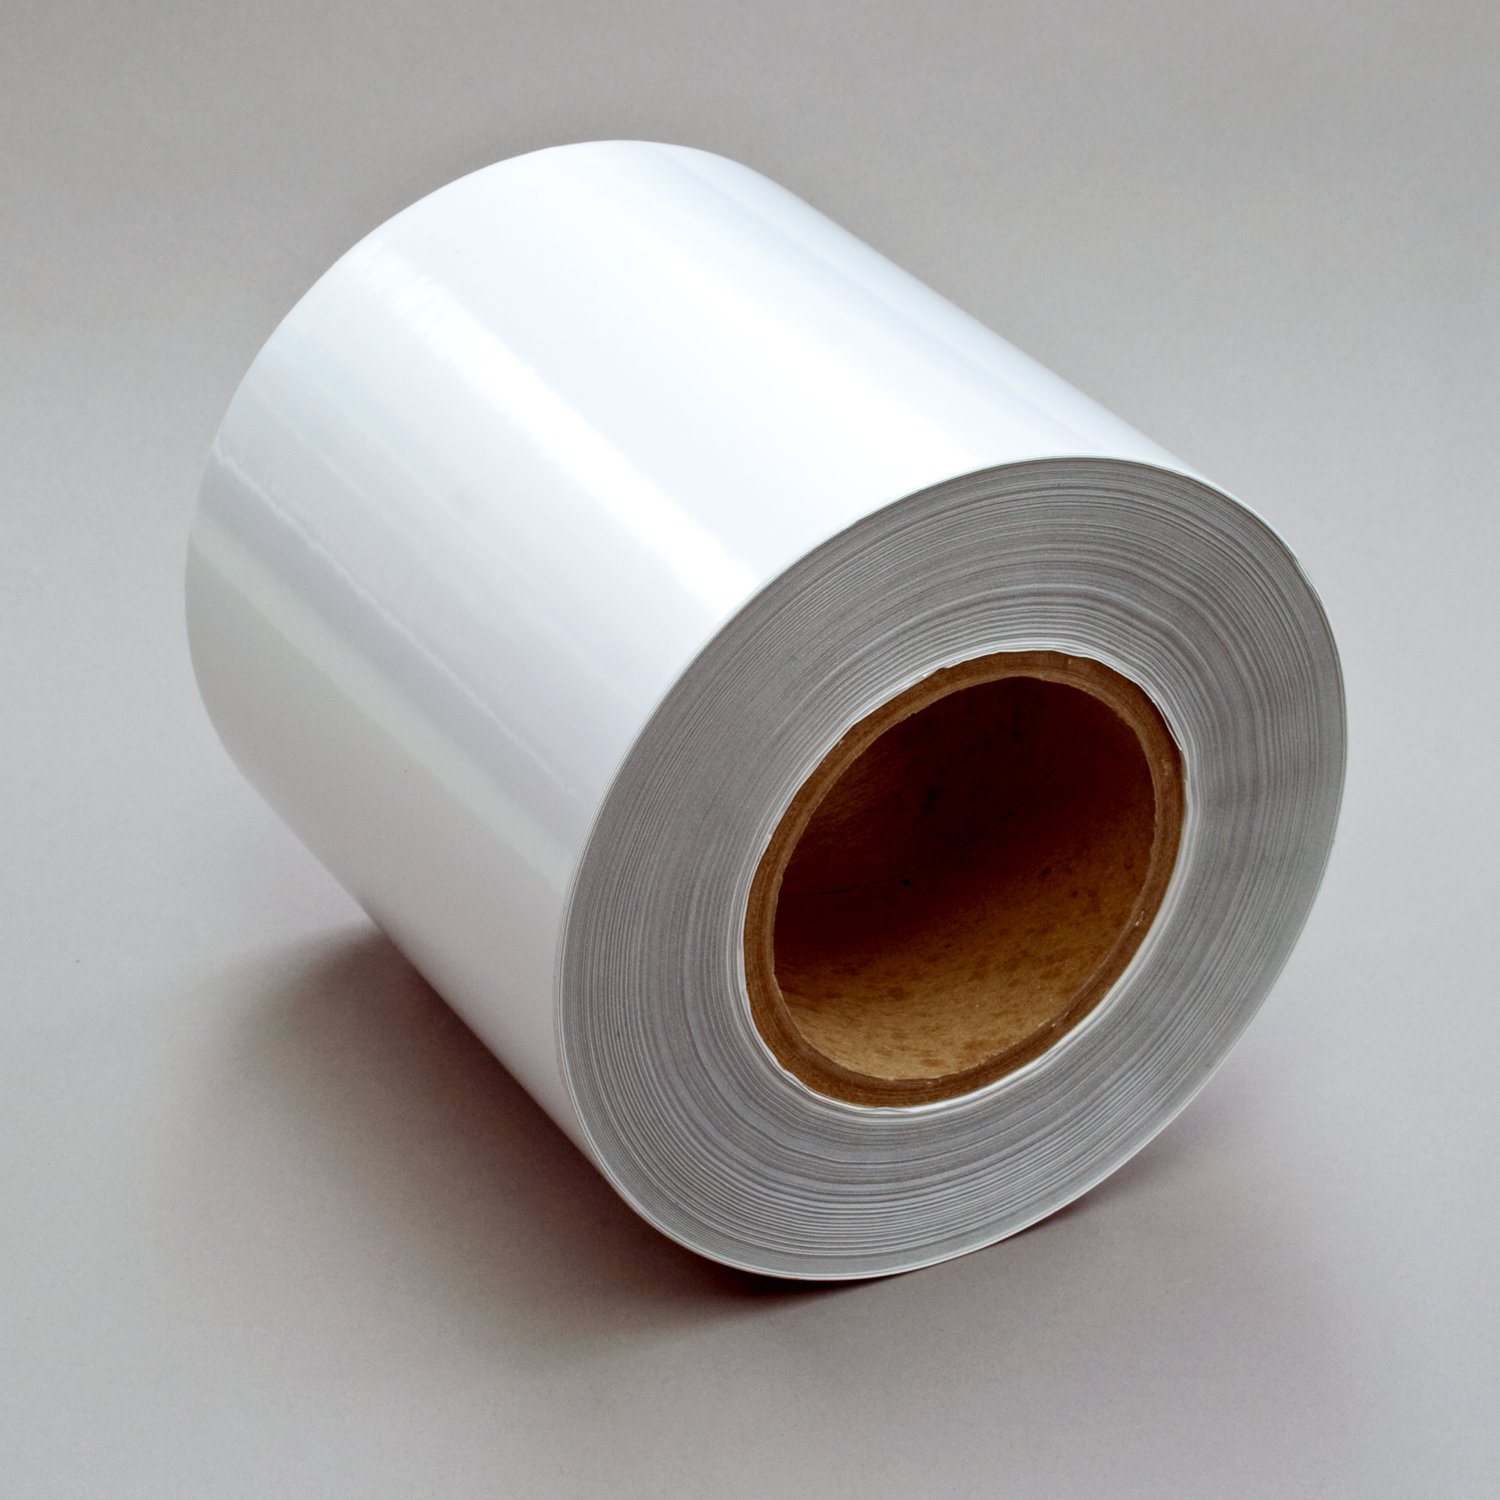 7000123561 - 3M Thermal Transfer Label Material 7872, Platinum Polyester Gloss, 6 in
x 1668 ft, 1 Roll/Case